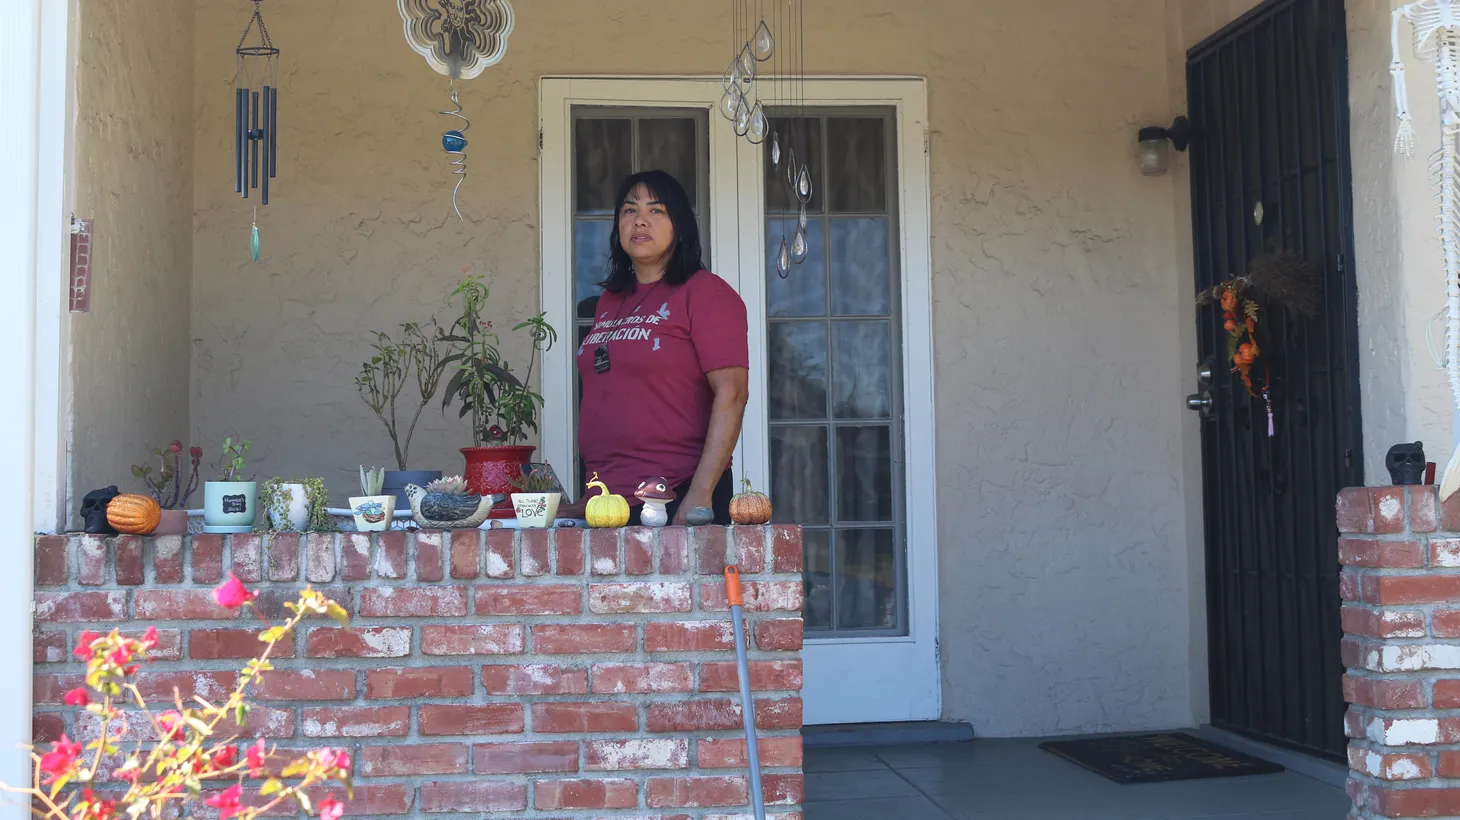 In 2020, a group of unhoused and housing-insecure Angelenos occupied vacant state-owned homes in El Sereno like this one, where Martha Escudero lives with her two children. She’s now being evicted.